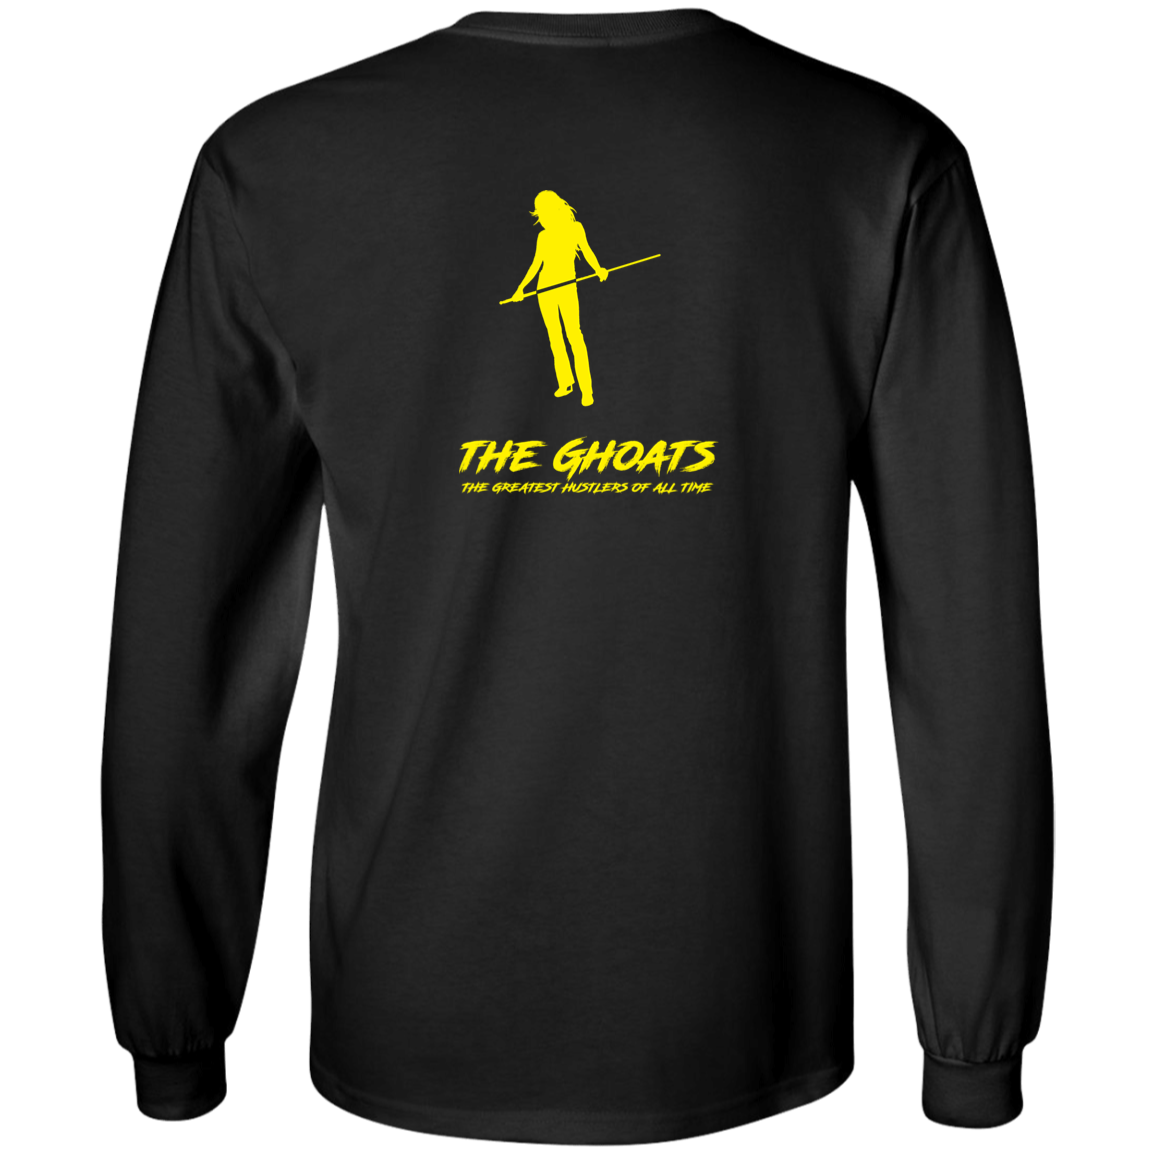 The GHOATS Custom Design. #34 Beware of Sharks. Play at Your Own Risk. (Ladies only version). Youth LS T-Shirt